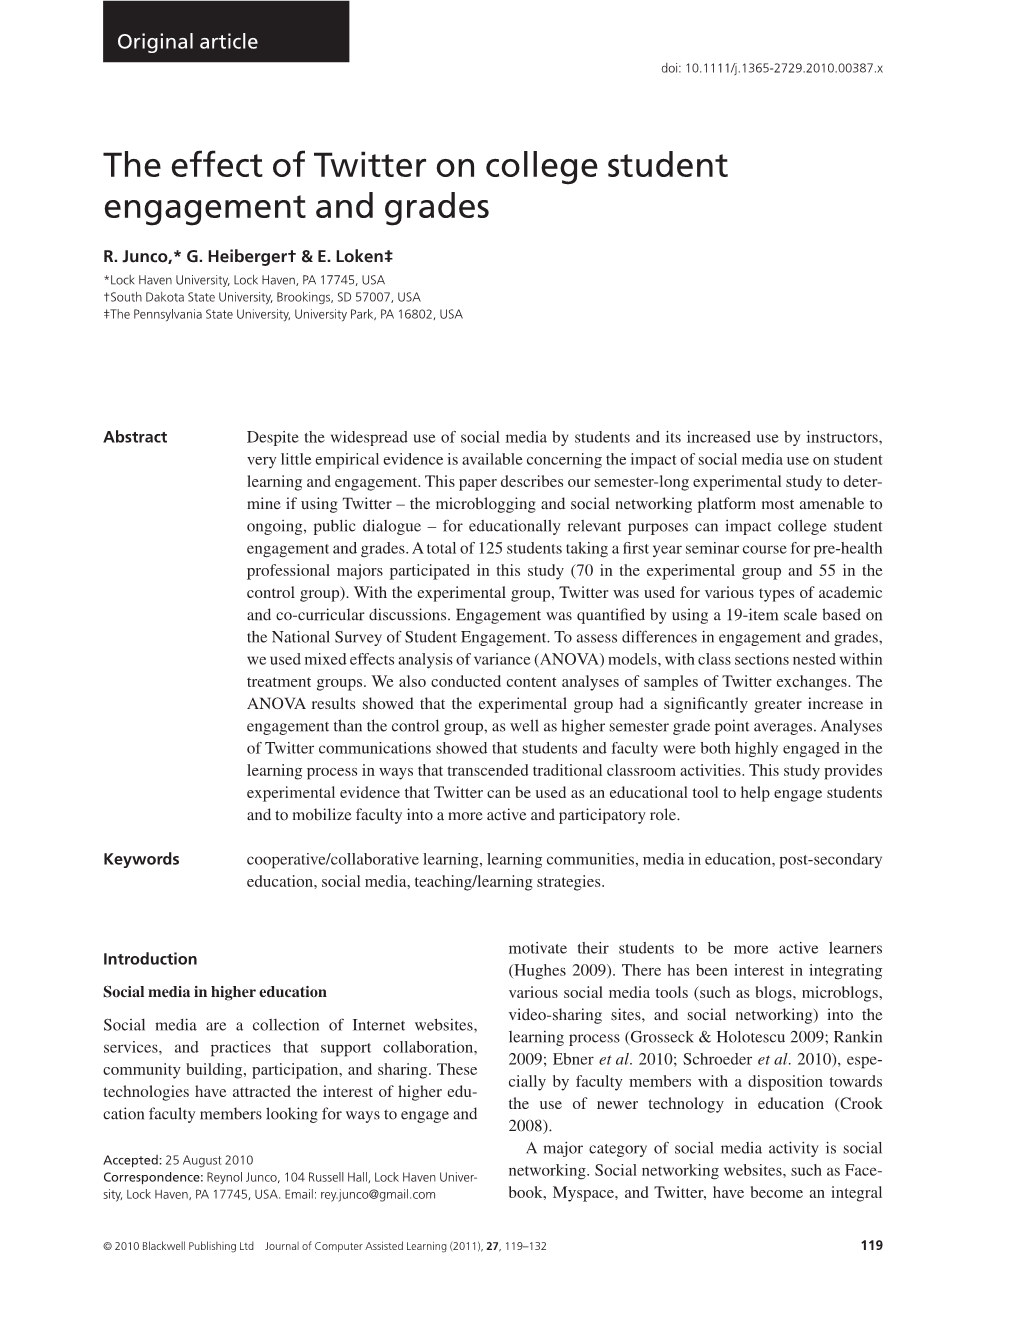 The Effect of Twitter on College Student Engagement and Grades